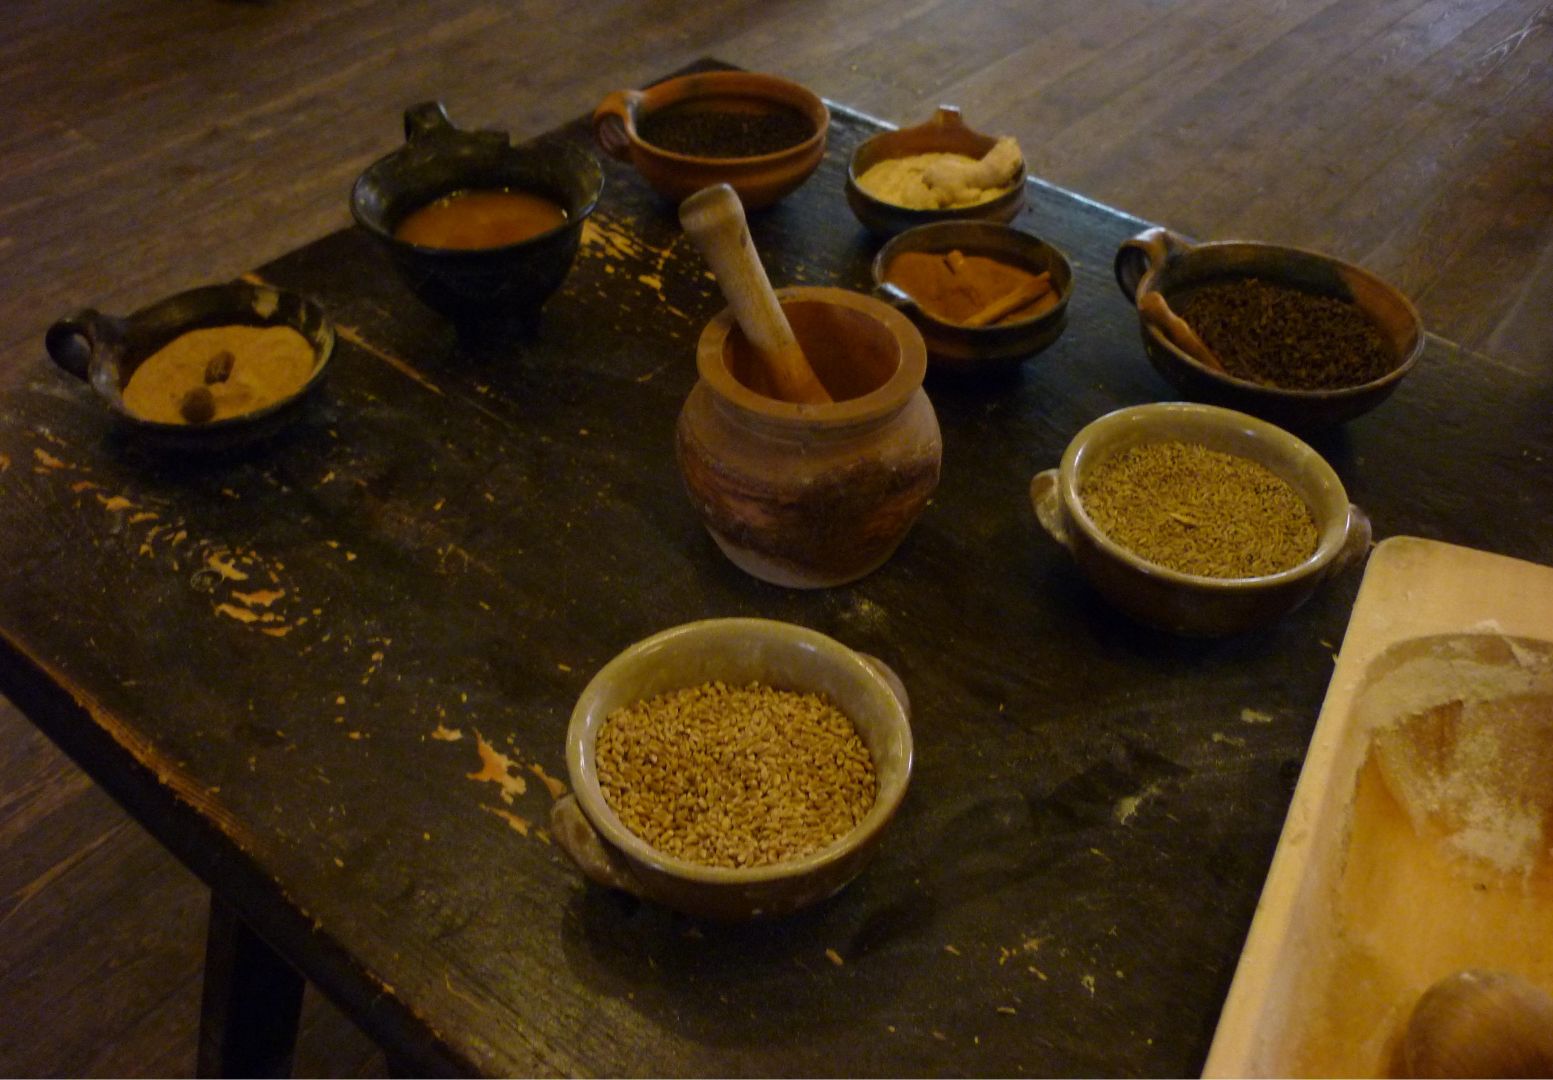 Dishes and traditional spices for making gingerbread